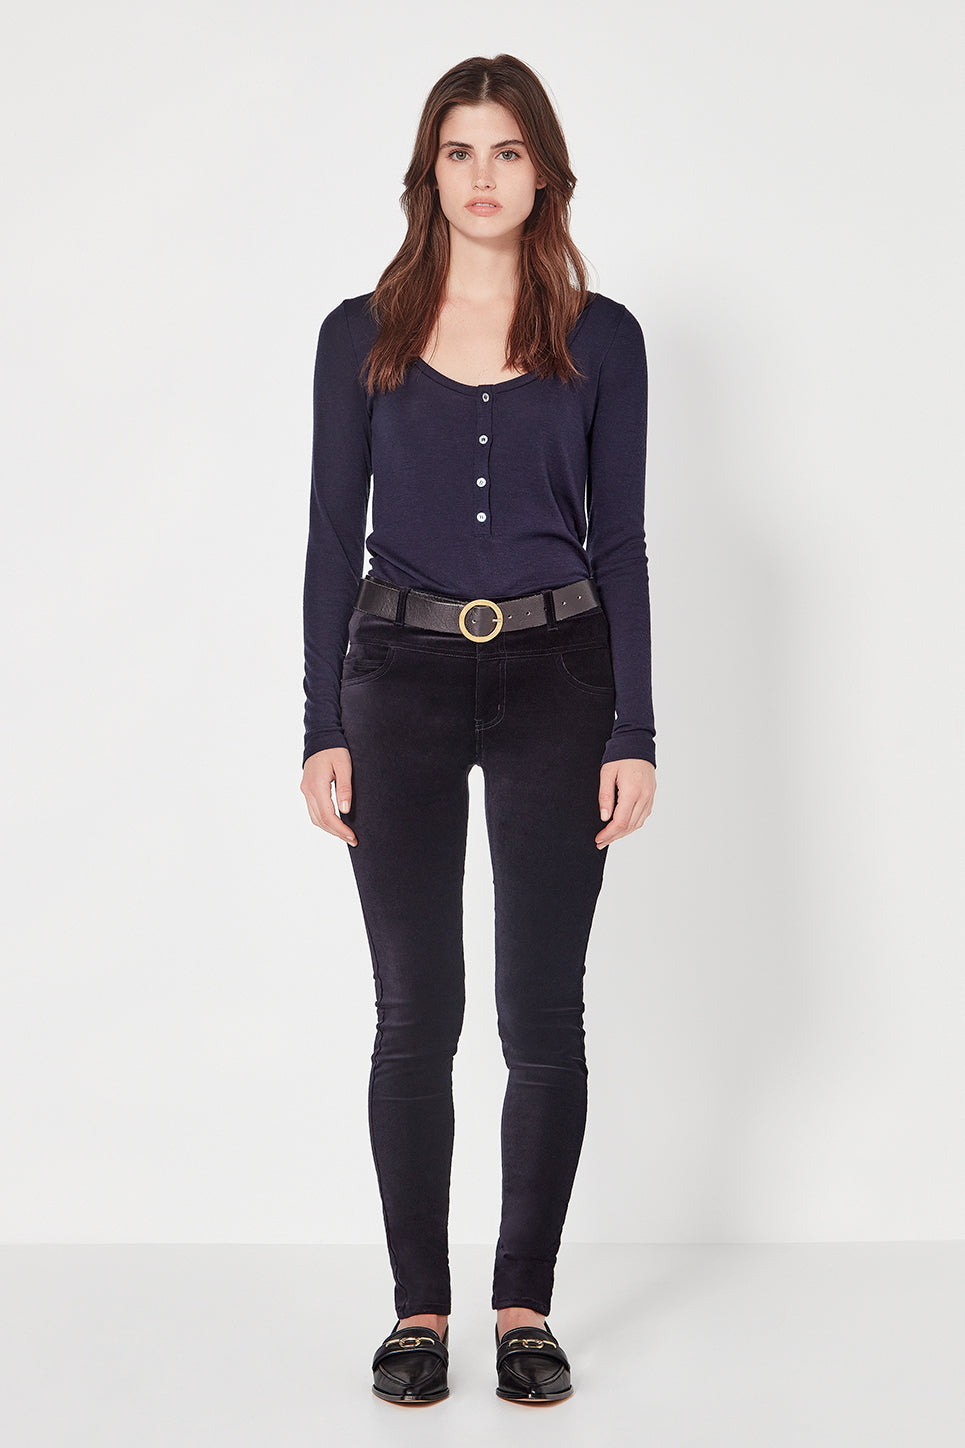 The Malo Jean in Navy